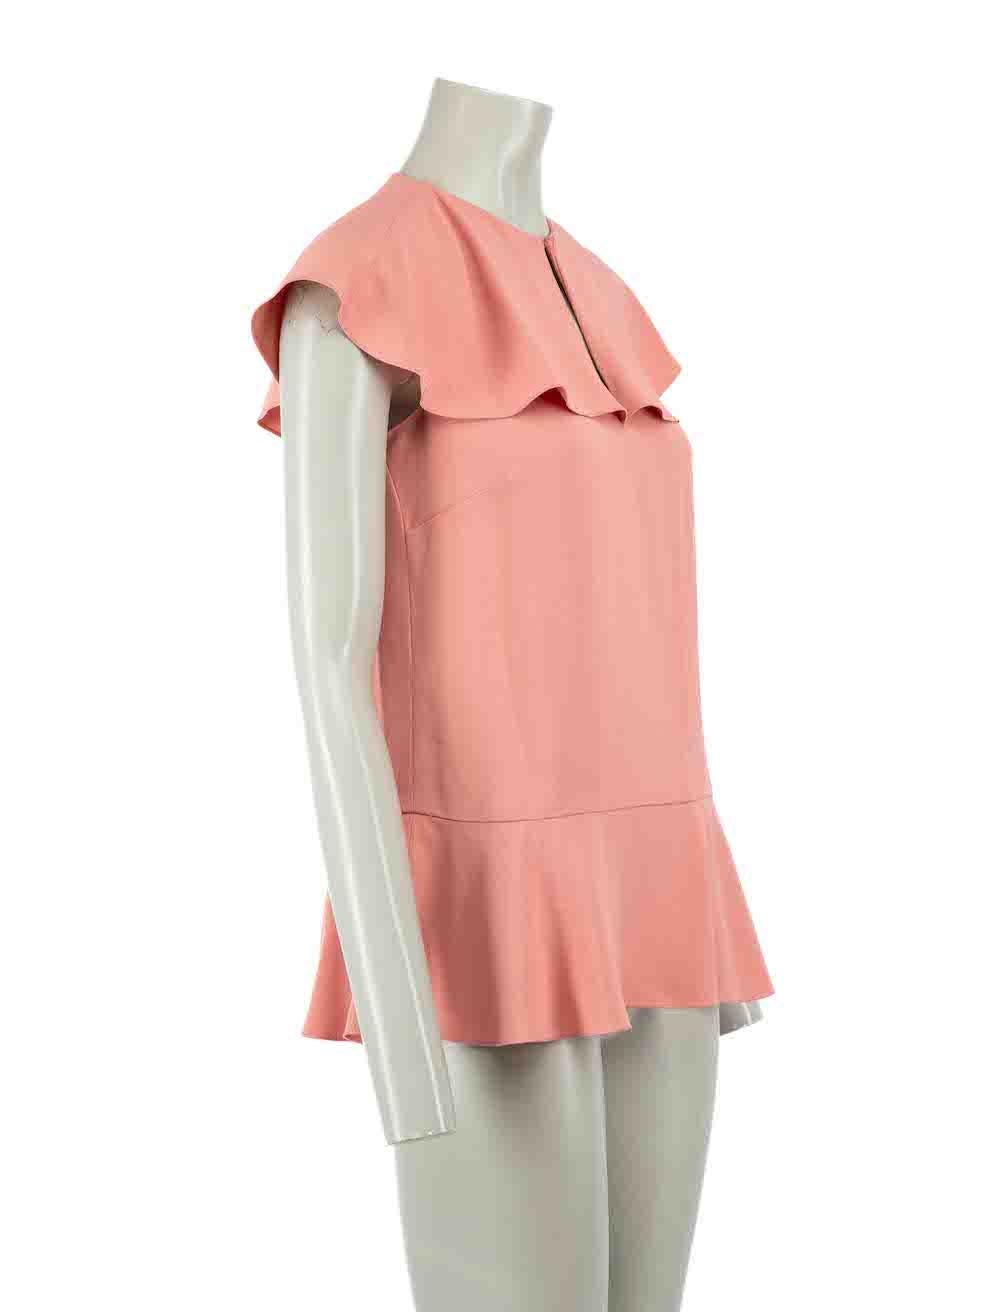 CONDITION is Very good. Minimal wear to top is evident. Minimal wear to the brand label at the rear neckline lining with one side having become detached on this used Red Valentino designer resale item.
 
 Details
 Pink
 Synthetic
 Top
 Sleeveless
